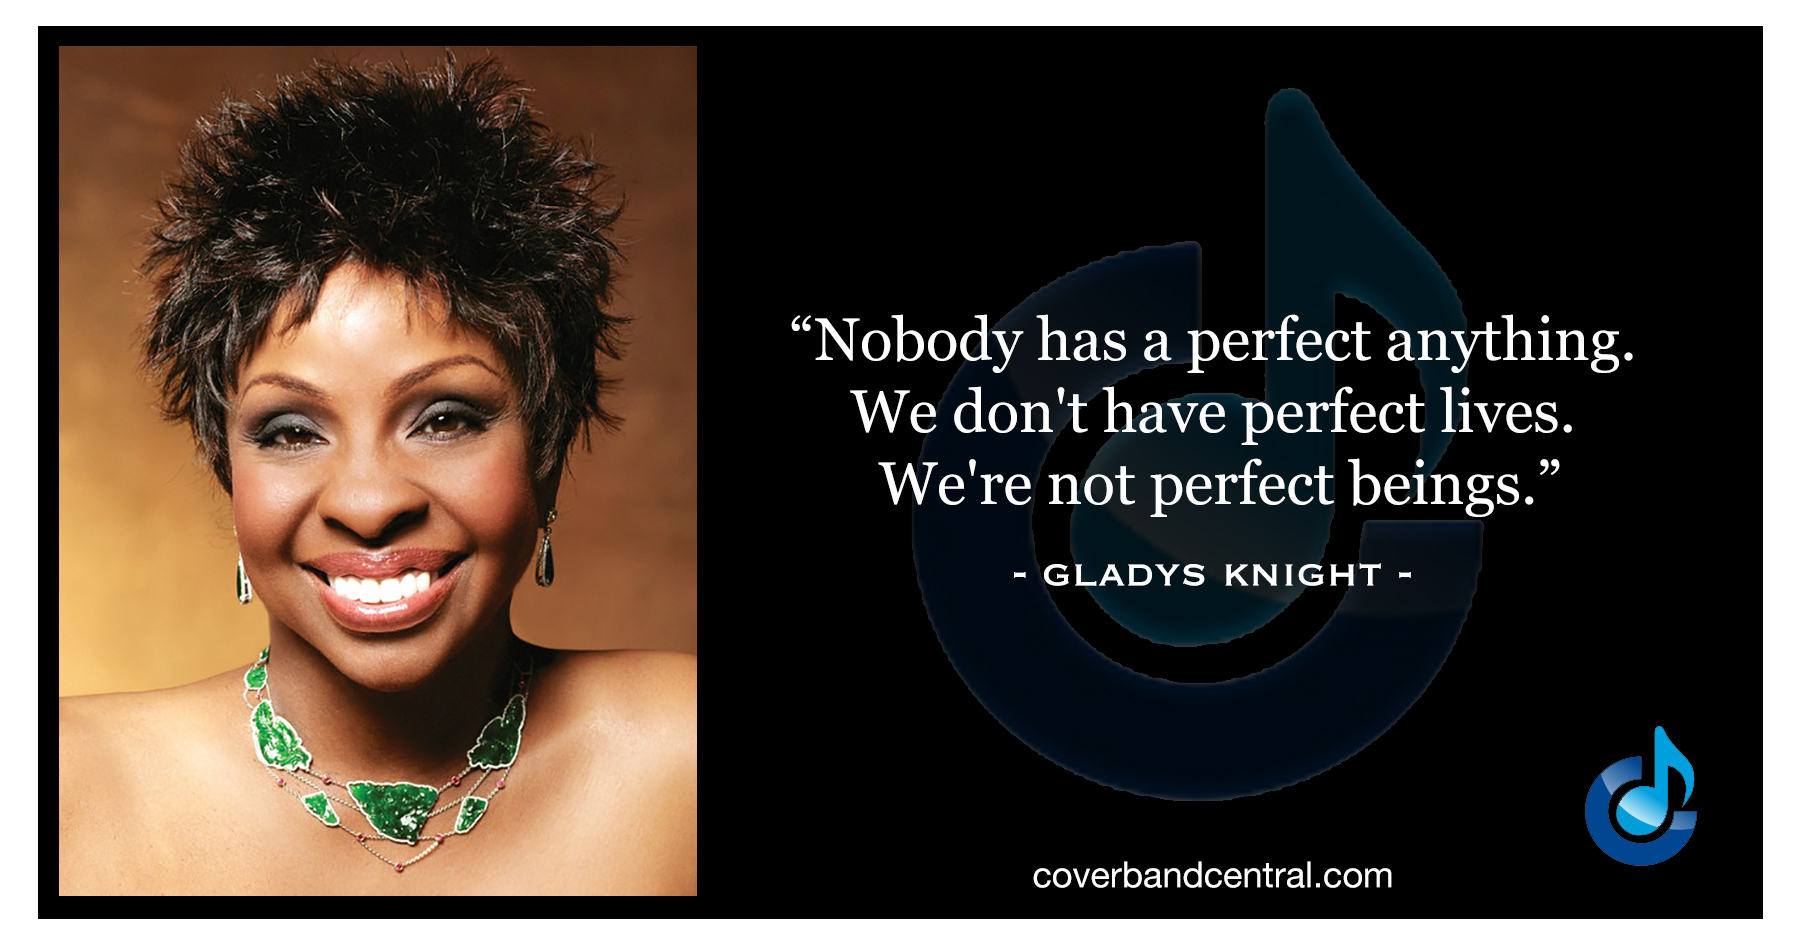 Gladys Knight quote